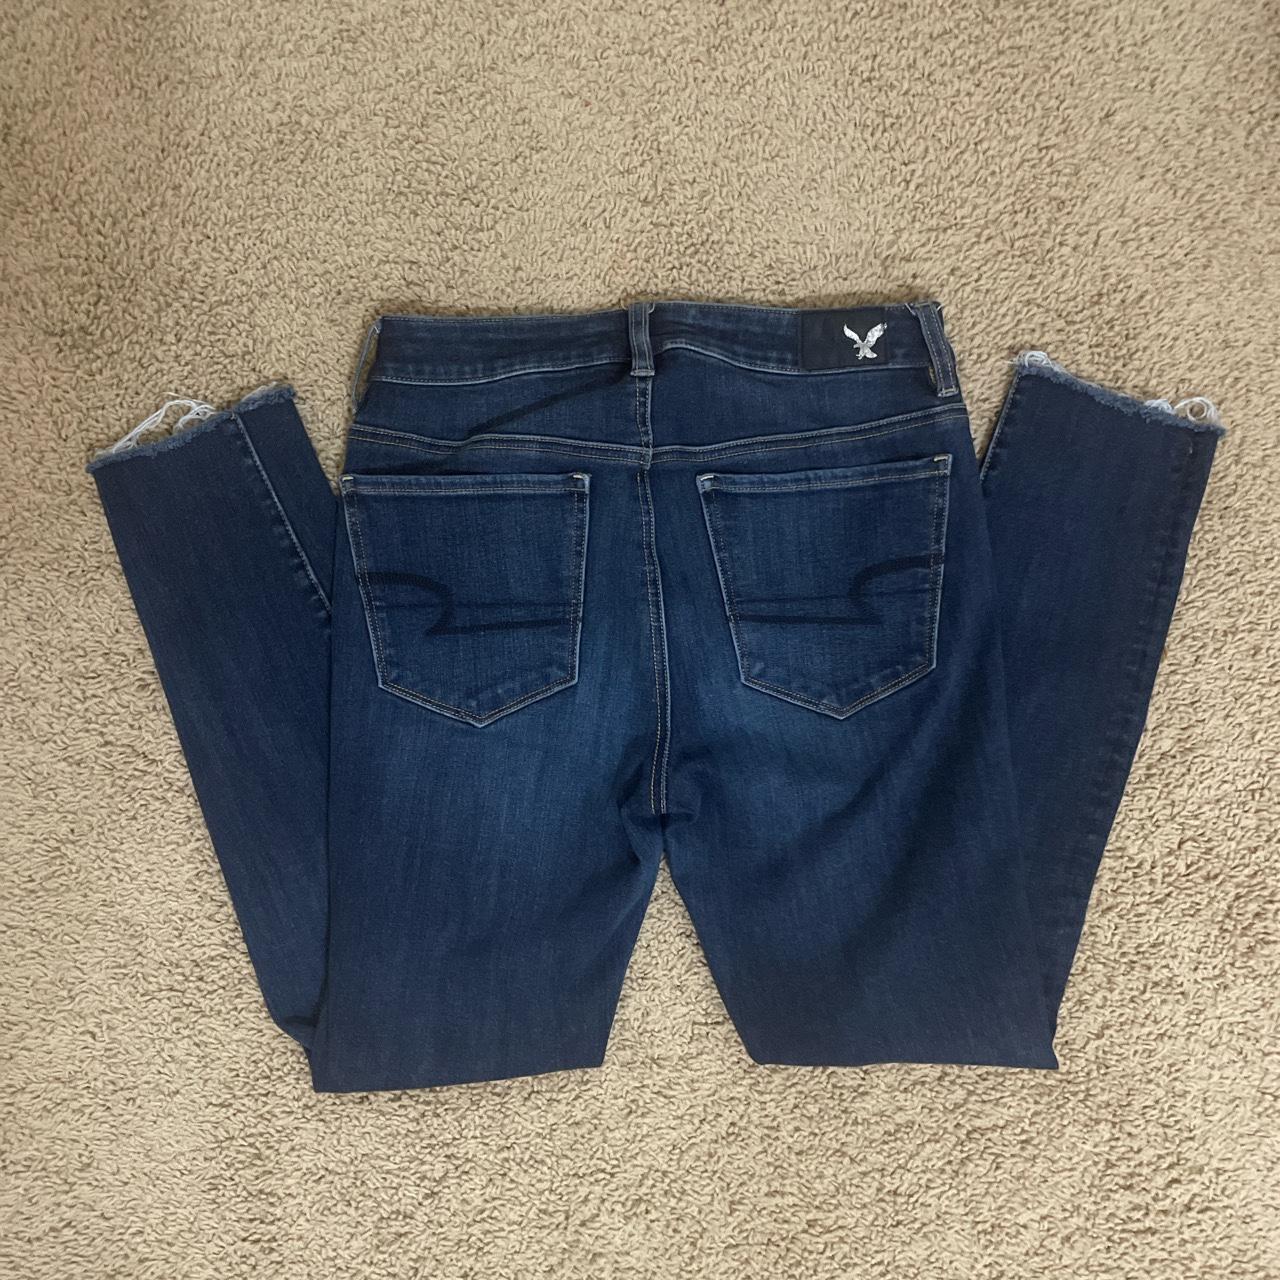 American Eagle navy skinny jeans fits xs/s/m because - Depop